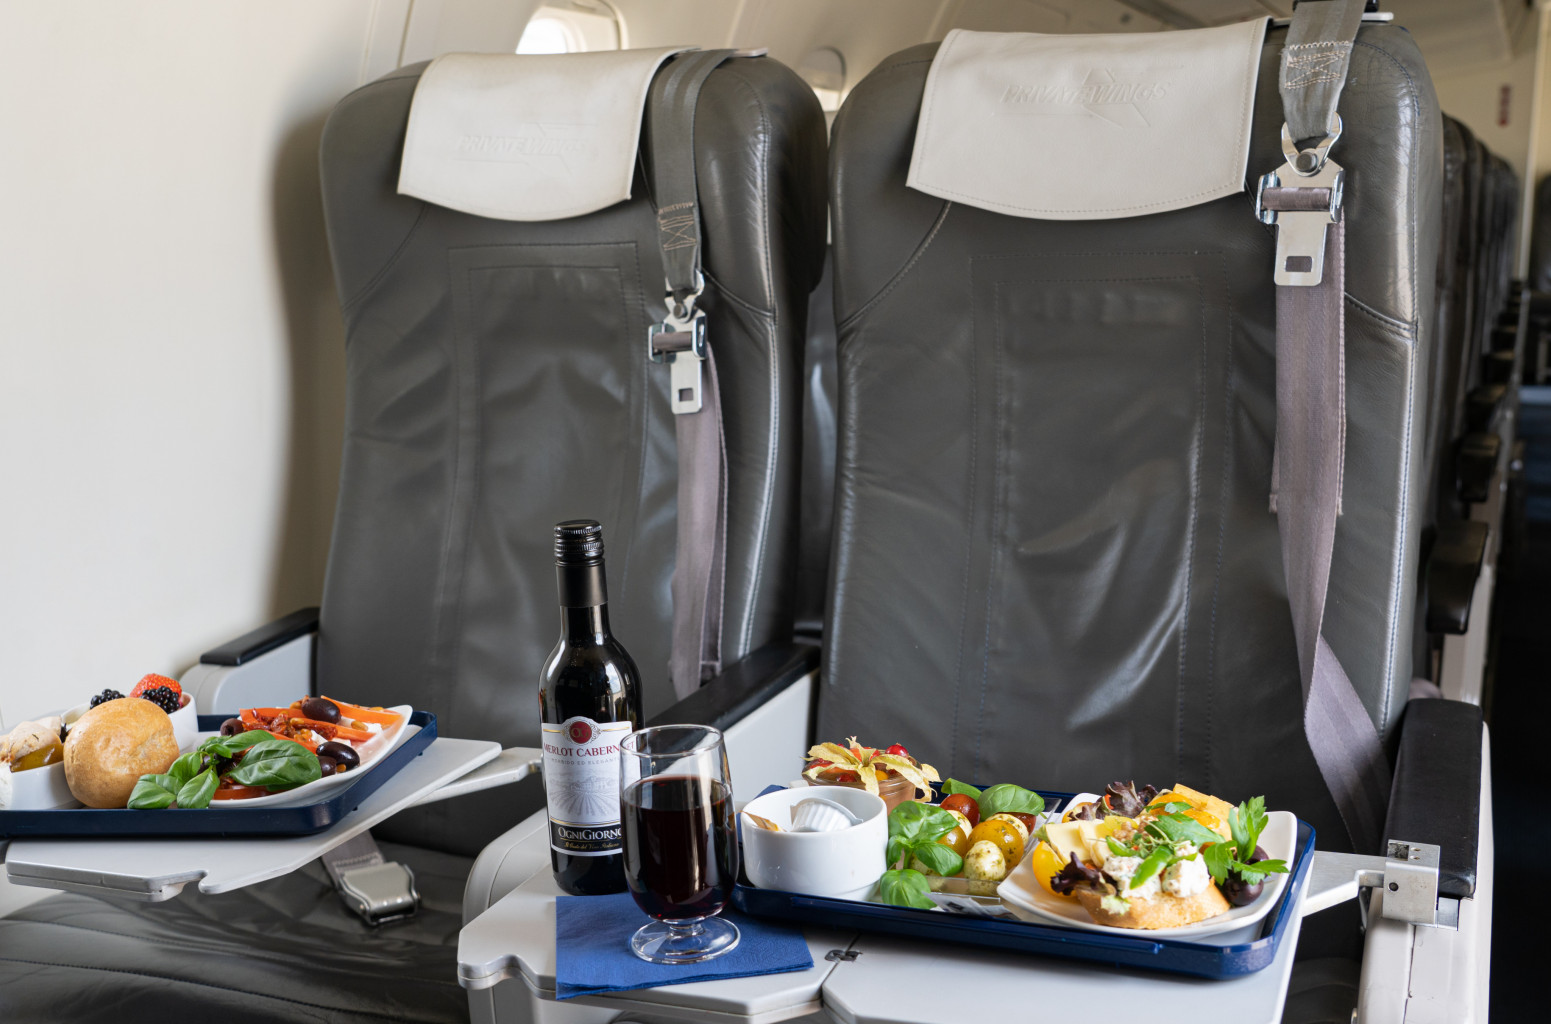 private wings offers VIP catering on board as well as sandwiches and snacks